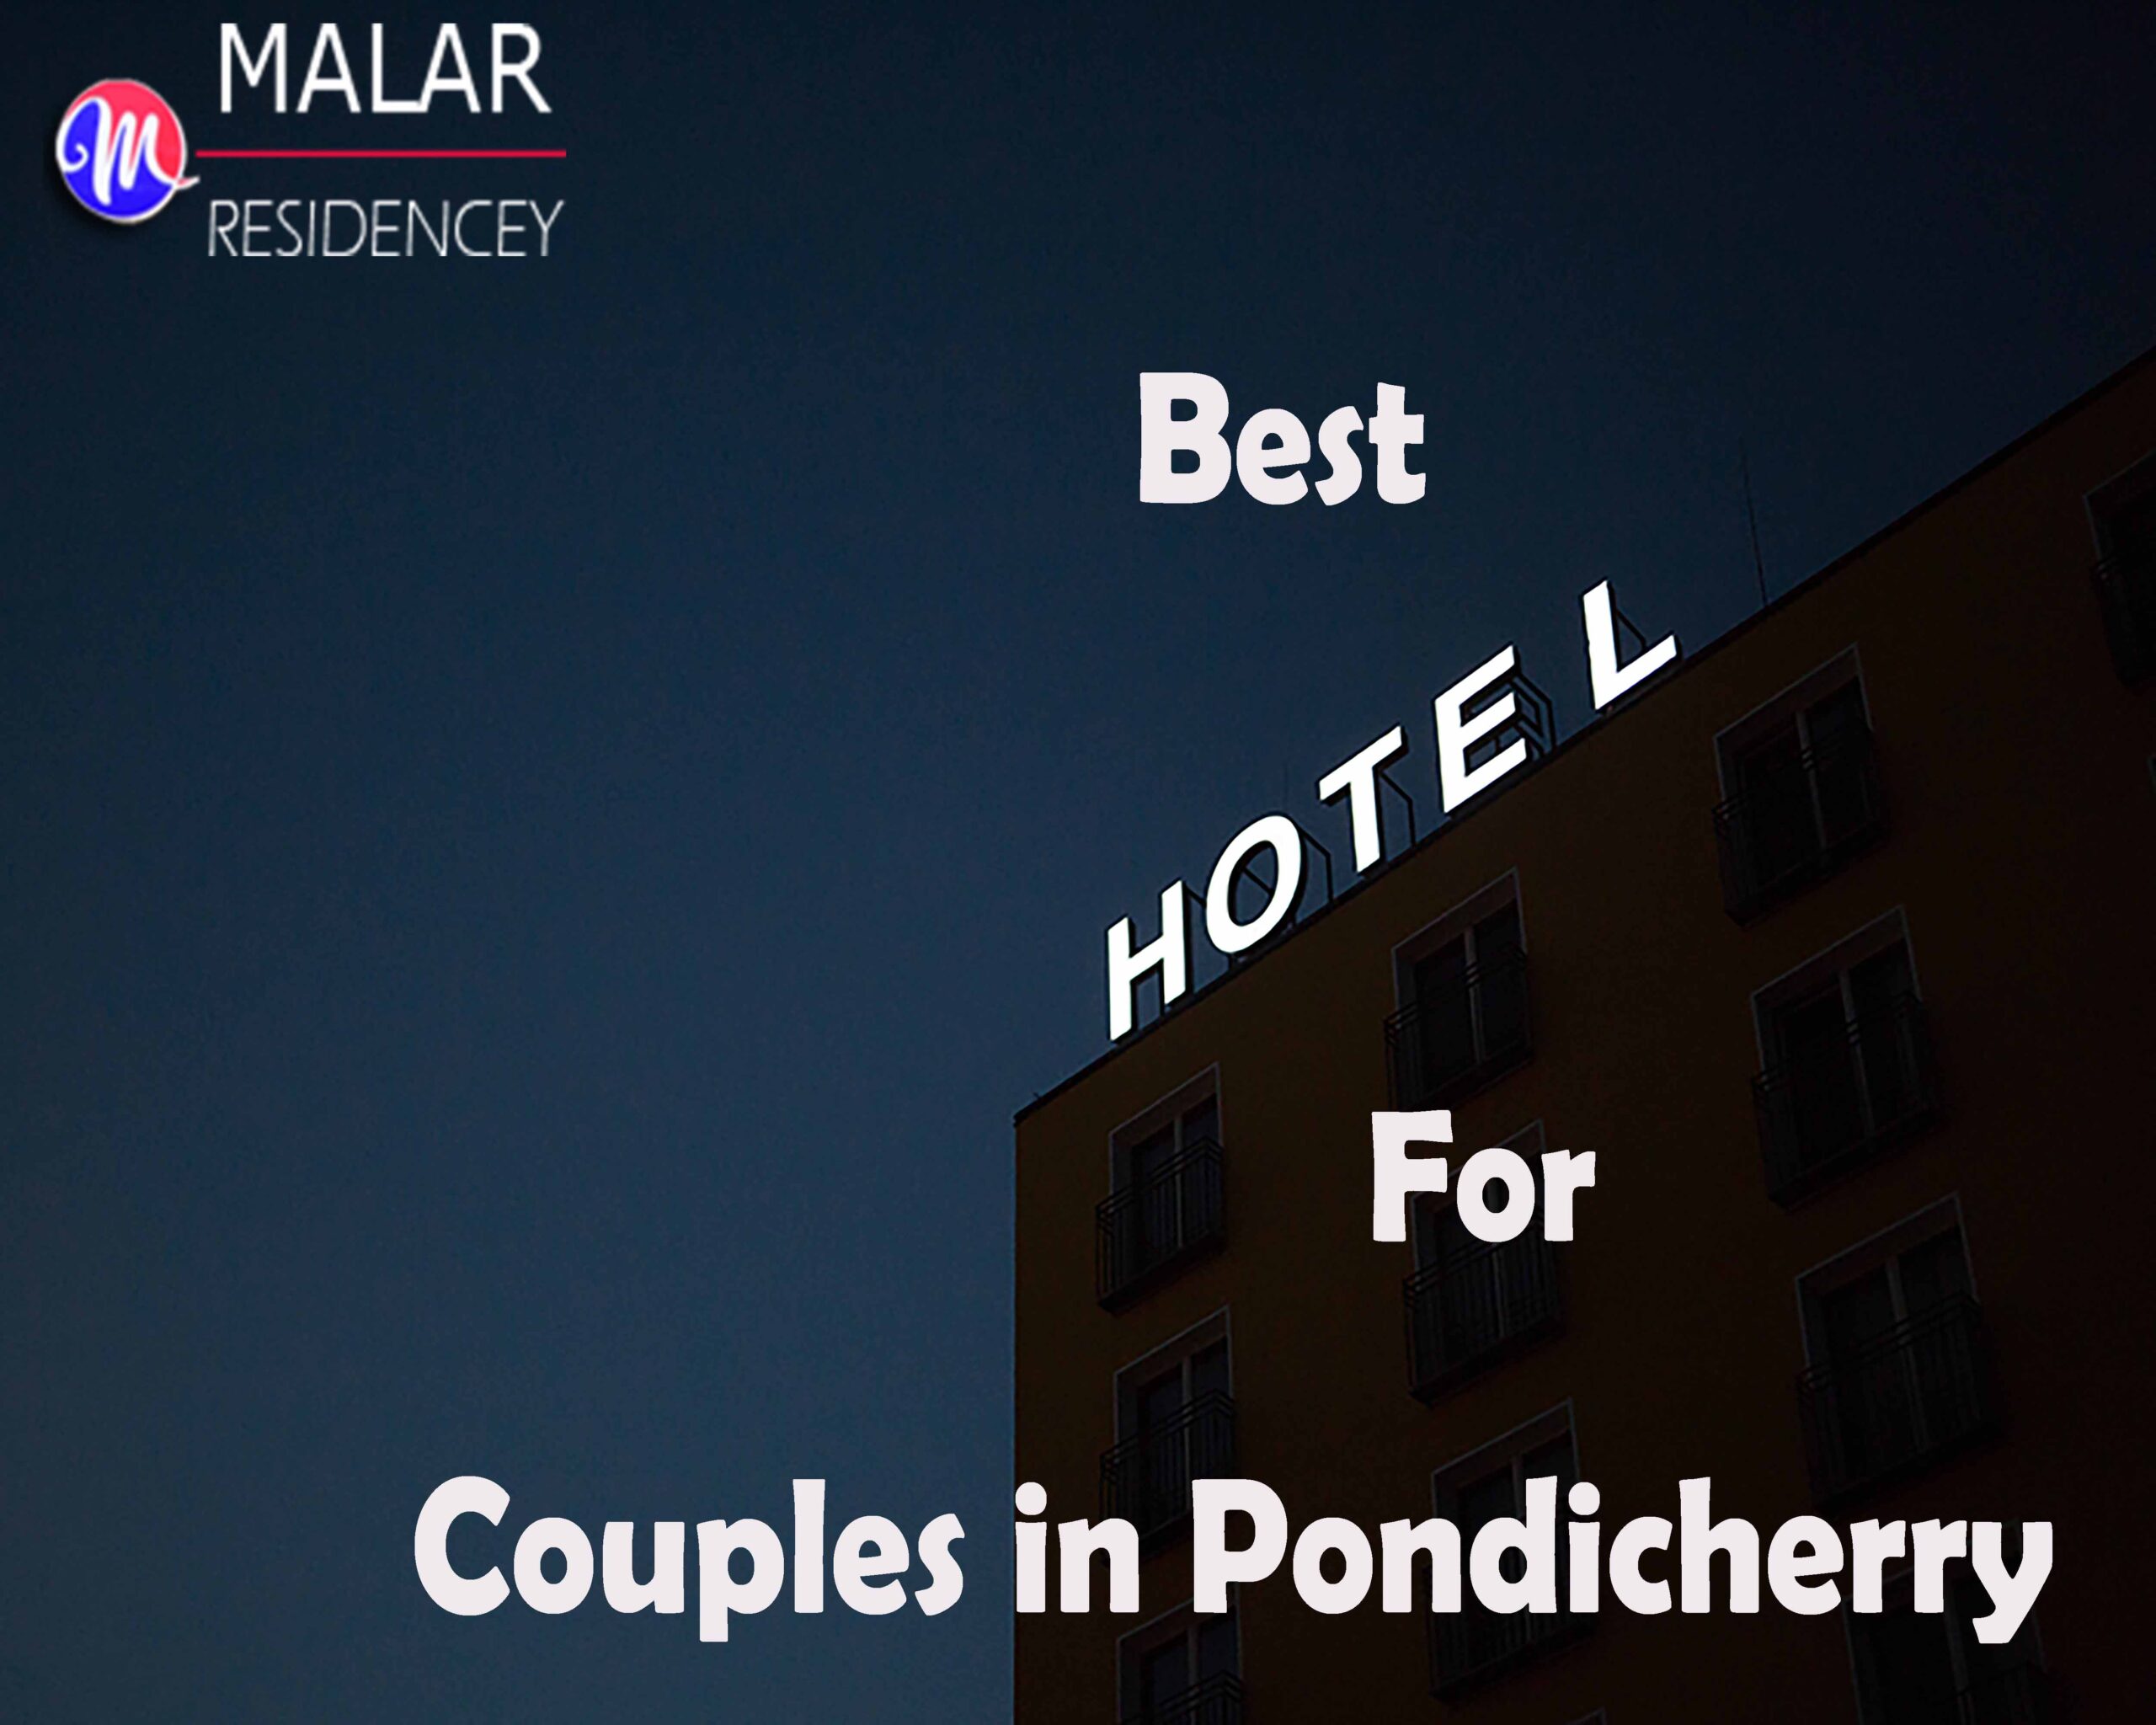 Best Hotel for Couples in Pondicherry